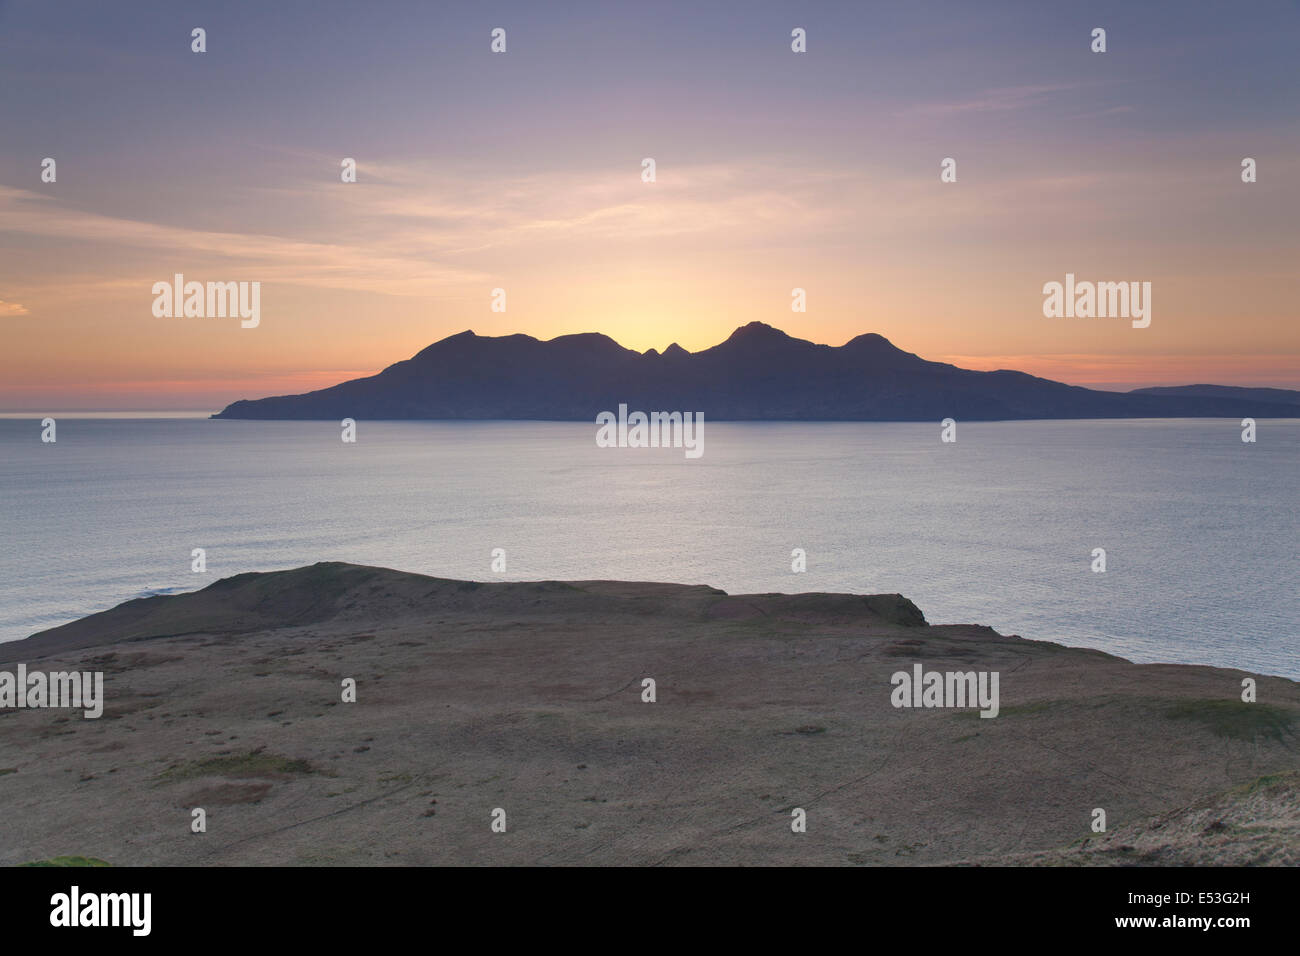 Sunset over The Isle of Rum seen from Laig Bay sands, Isle of eigg, Small Isles, Inner Hebrides, Scotland, UK Stock Photo